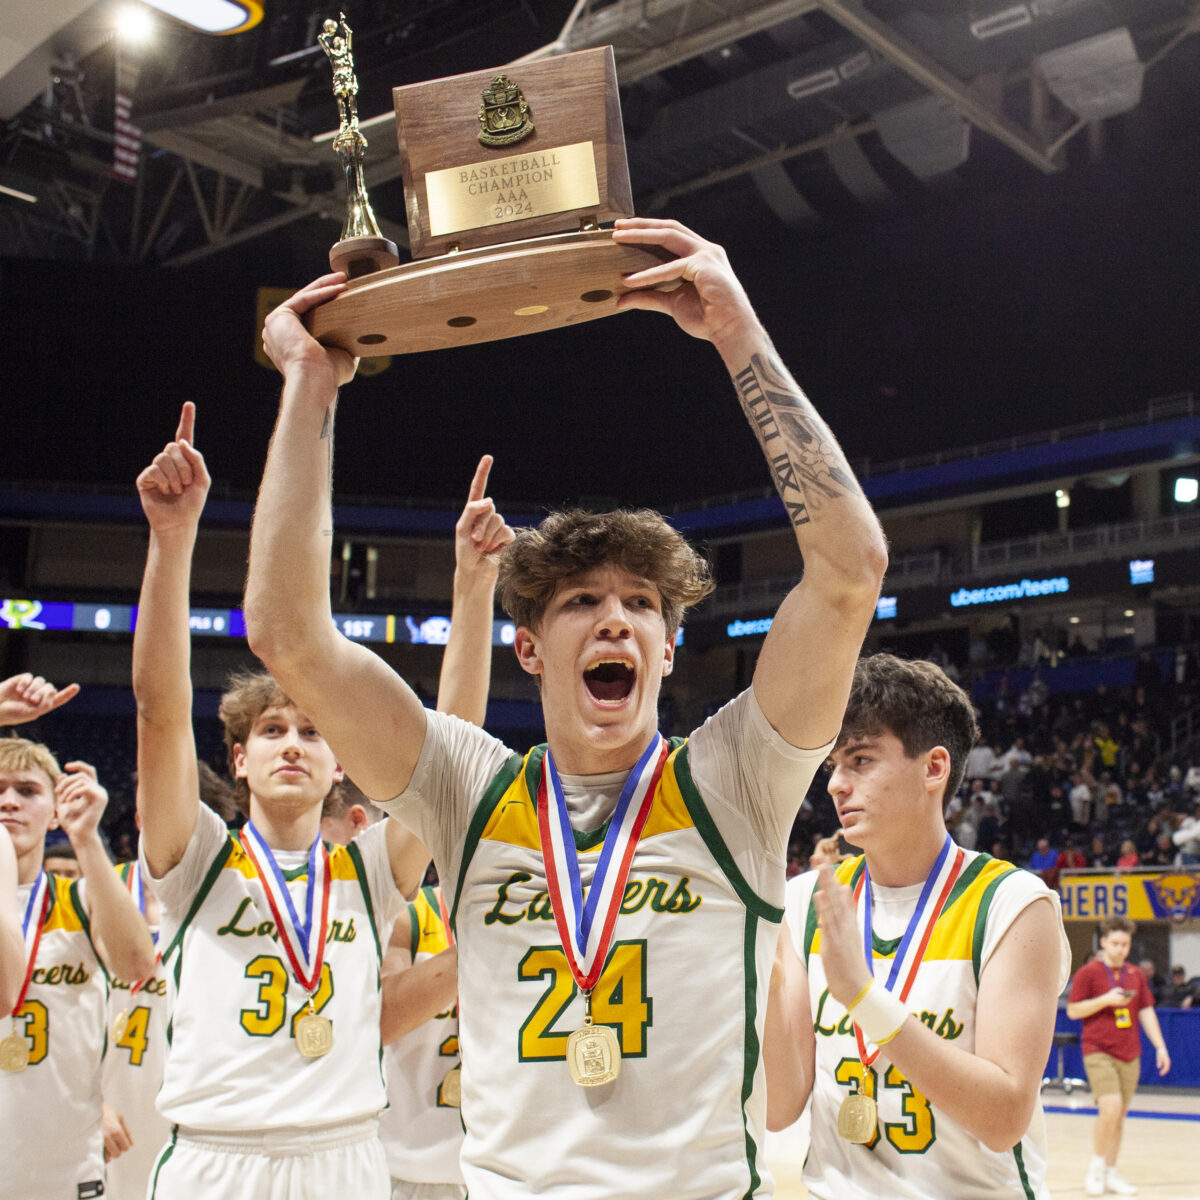 WPIAL Class 3A boys basketball: Deer Lakes wins second title in row with dominant showing on boards, at free-throw line against rival Burrell